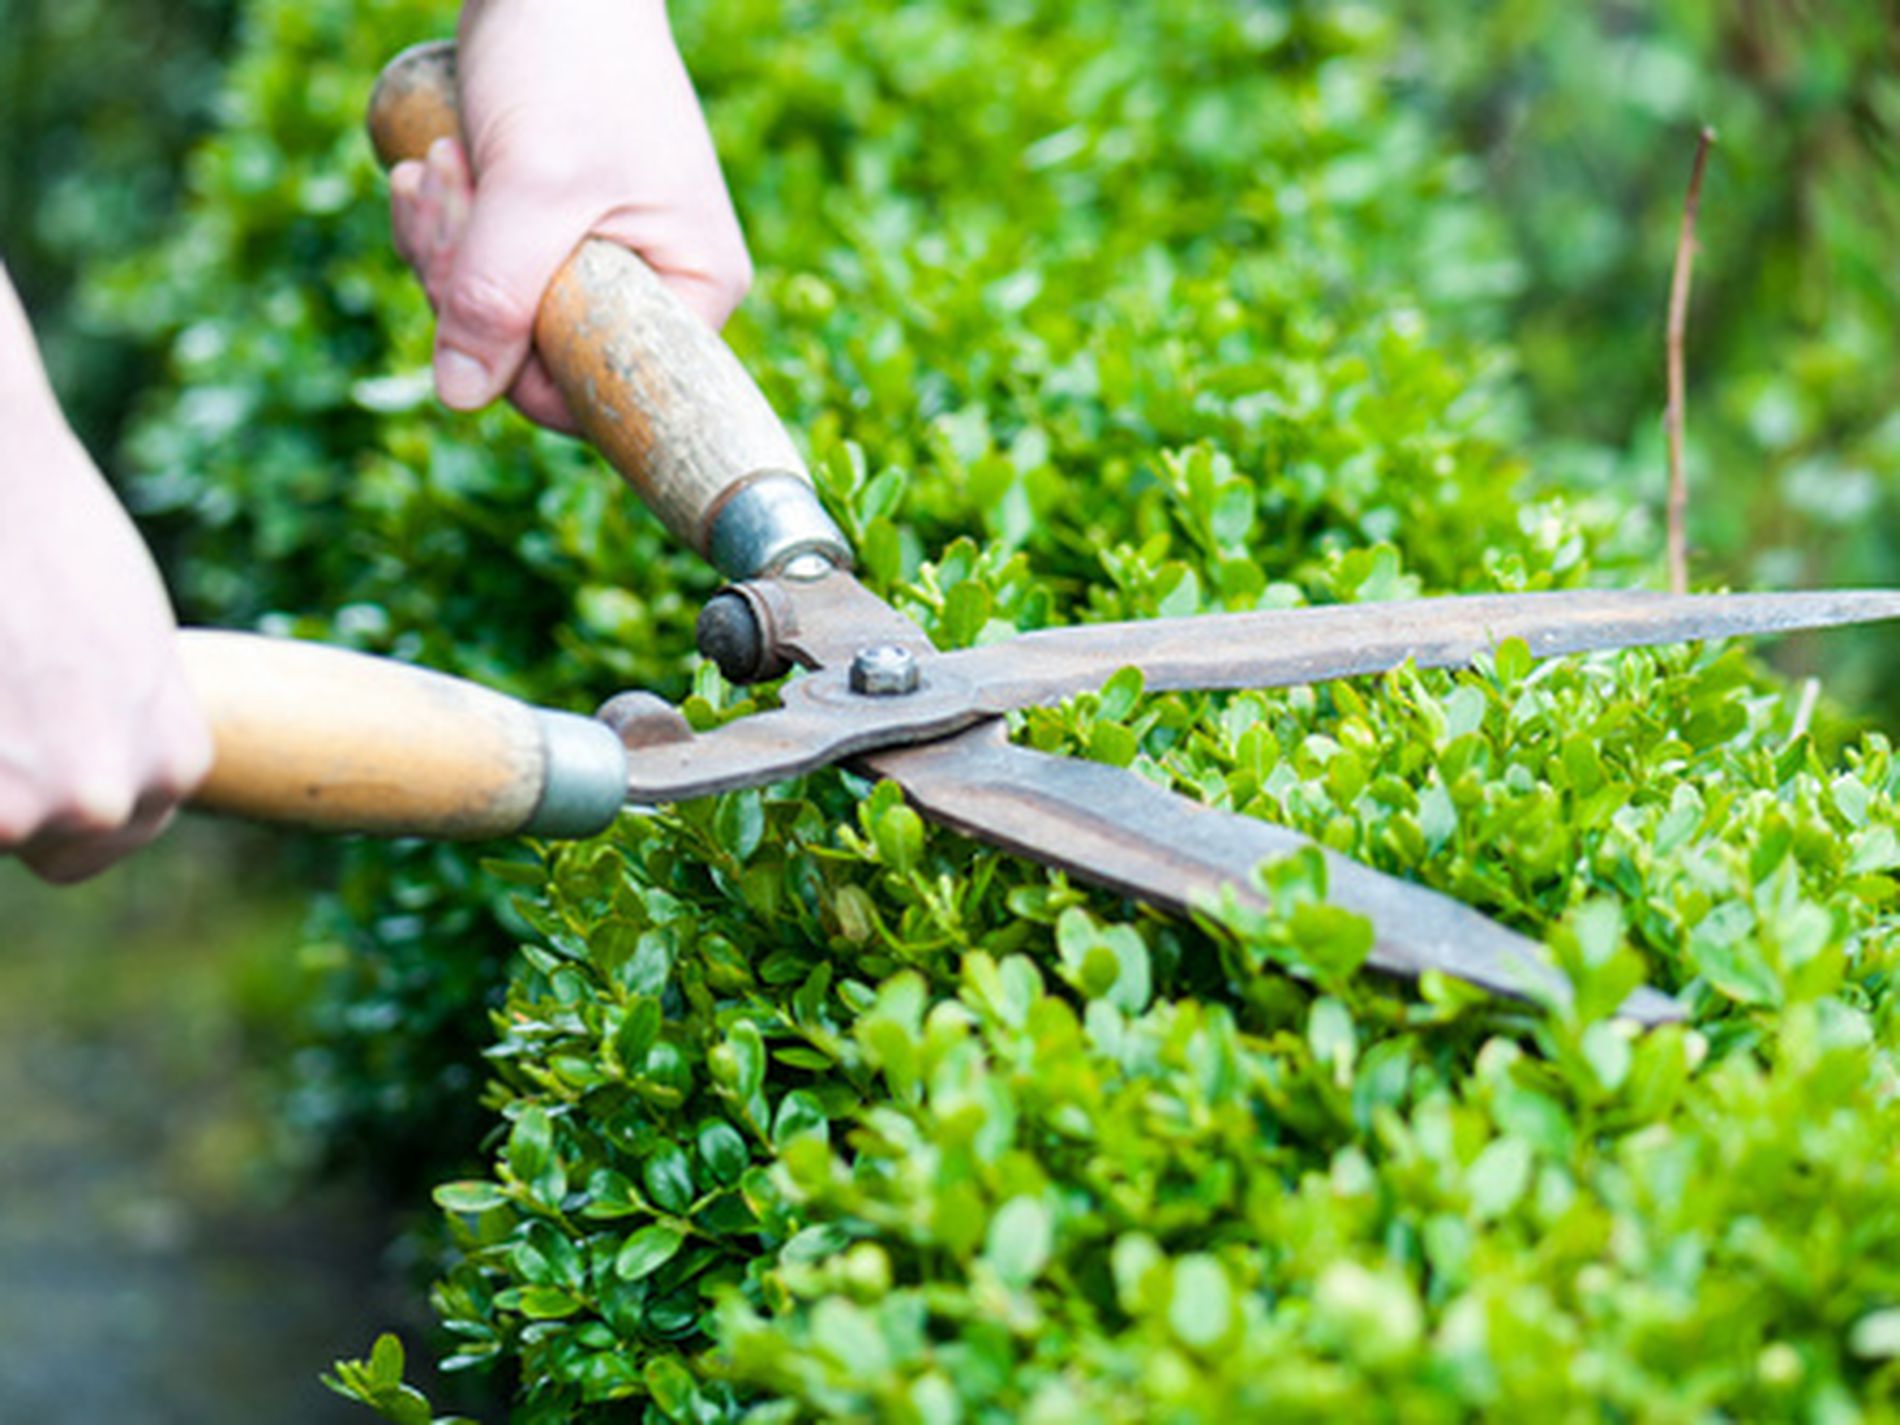 Long established Gardening and Mowing Business for sale